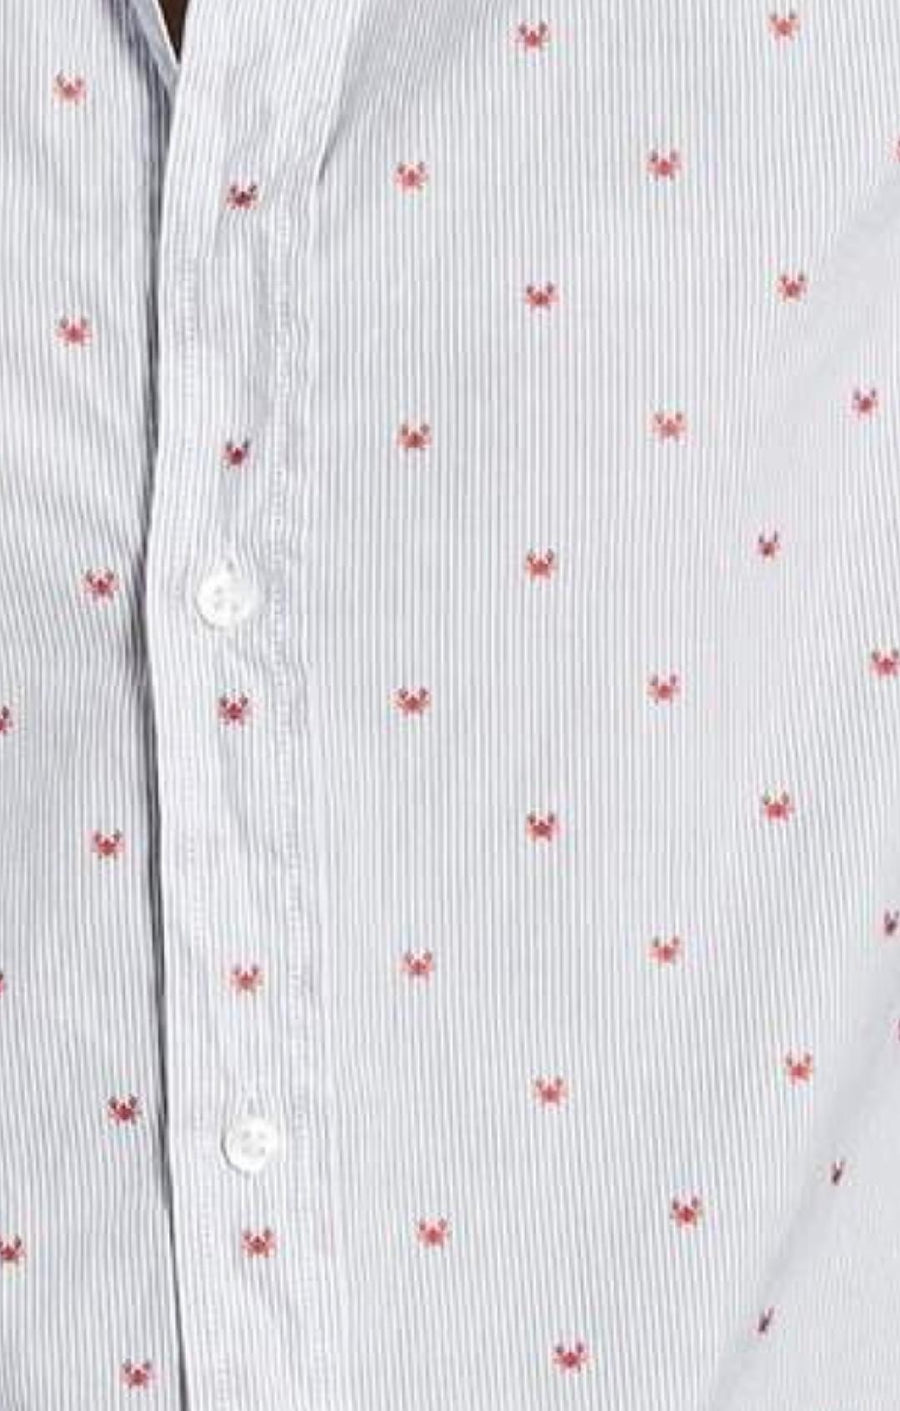 FRANK & EILEEN Frank Shirt in Blue Stripe with Crabs